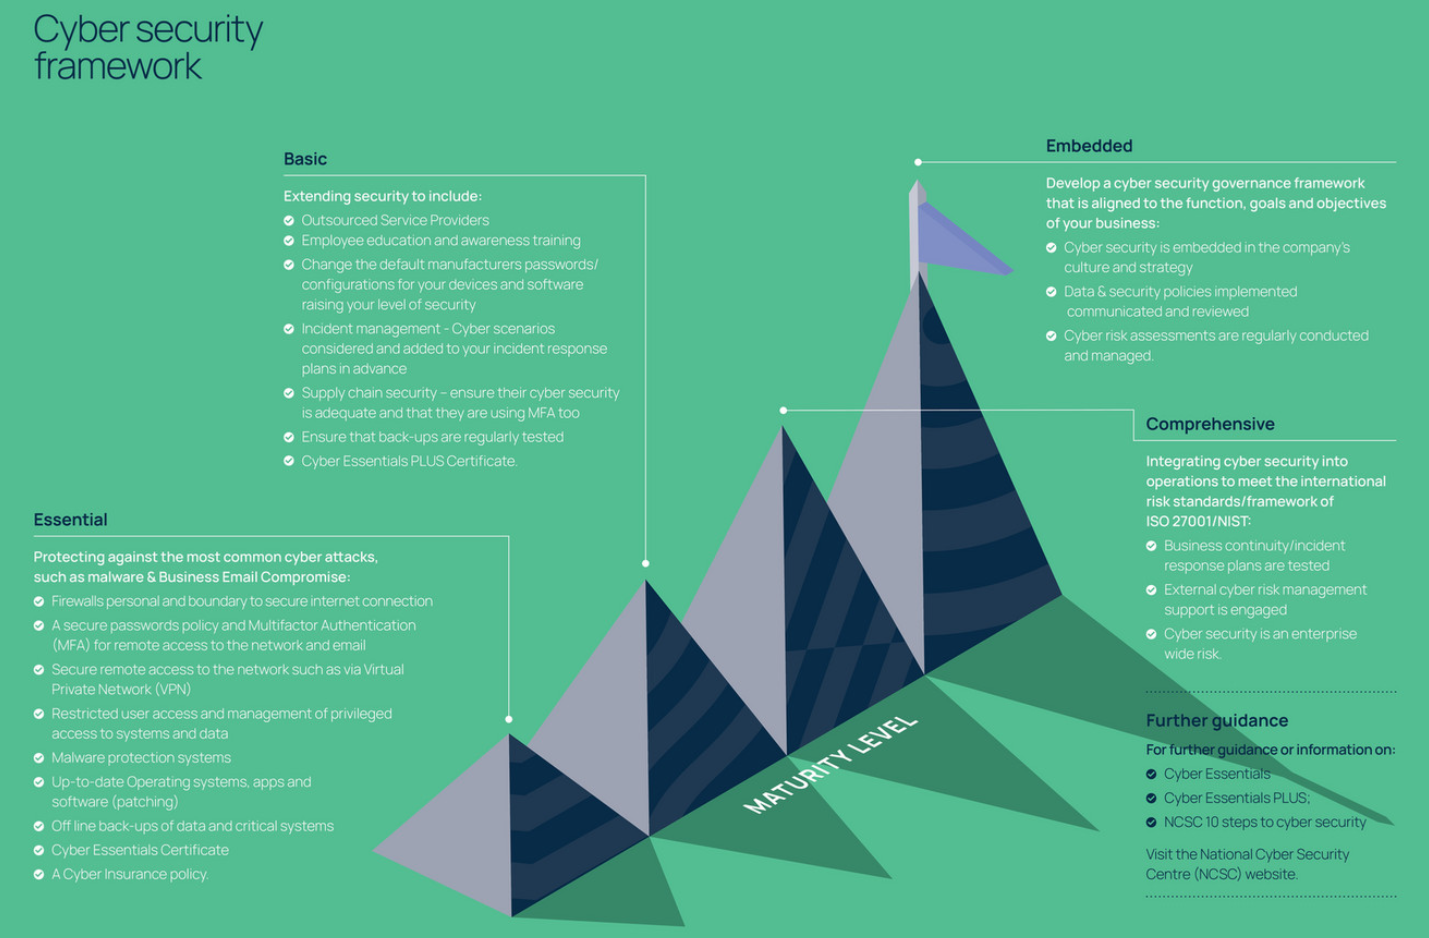 Cyber security framework infographic